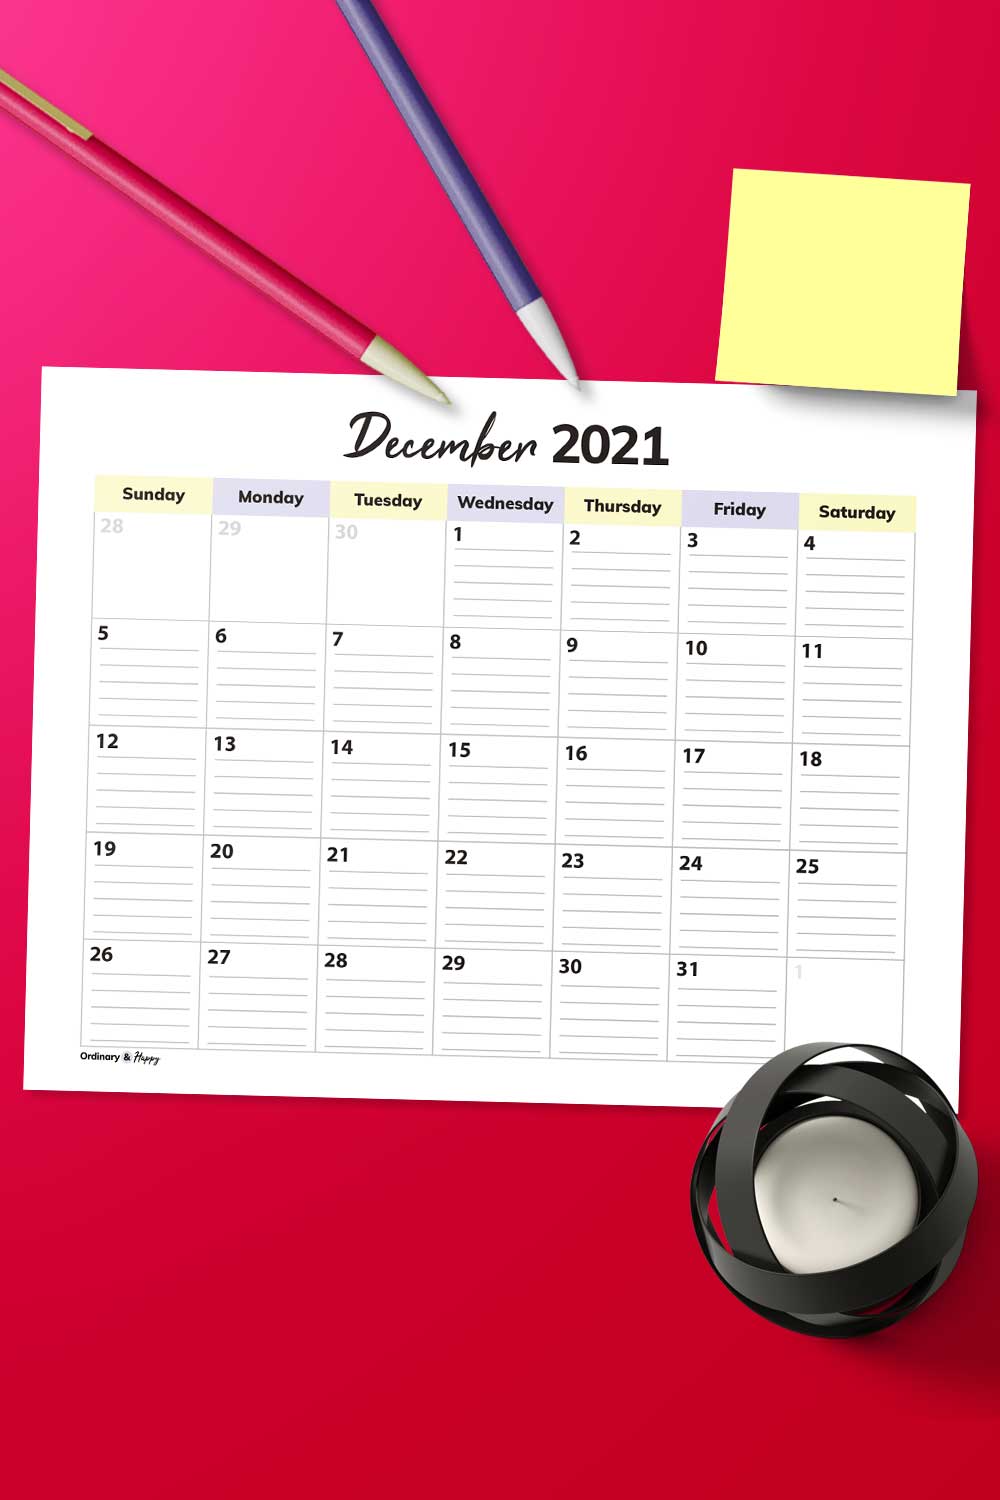 december-calendar-template-printables-free-and-premium-ordinary-and-happy